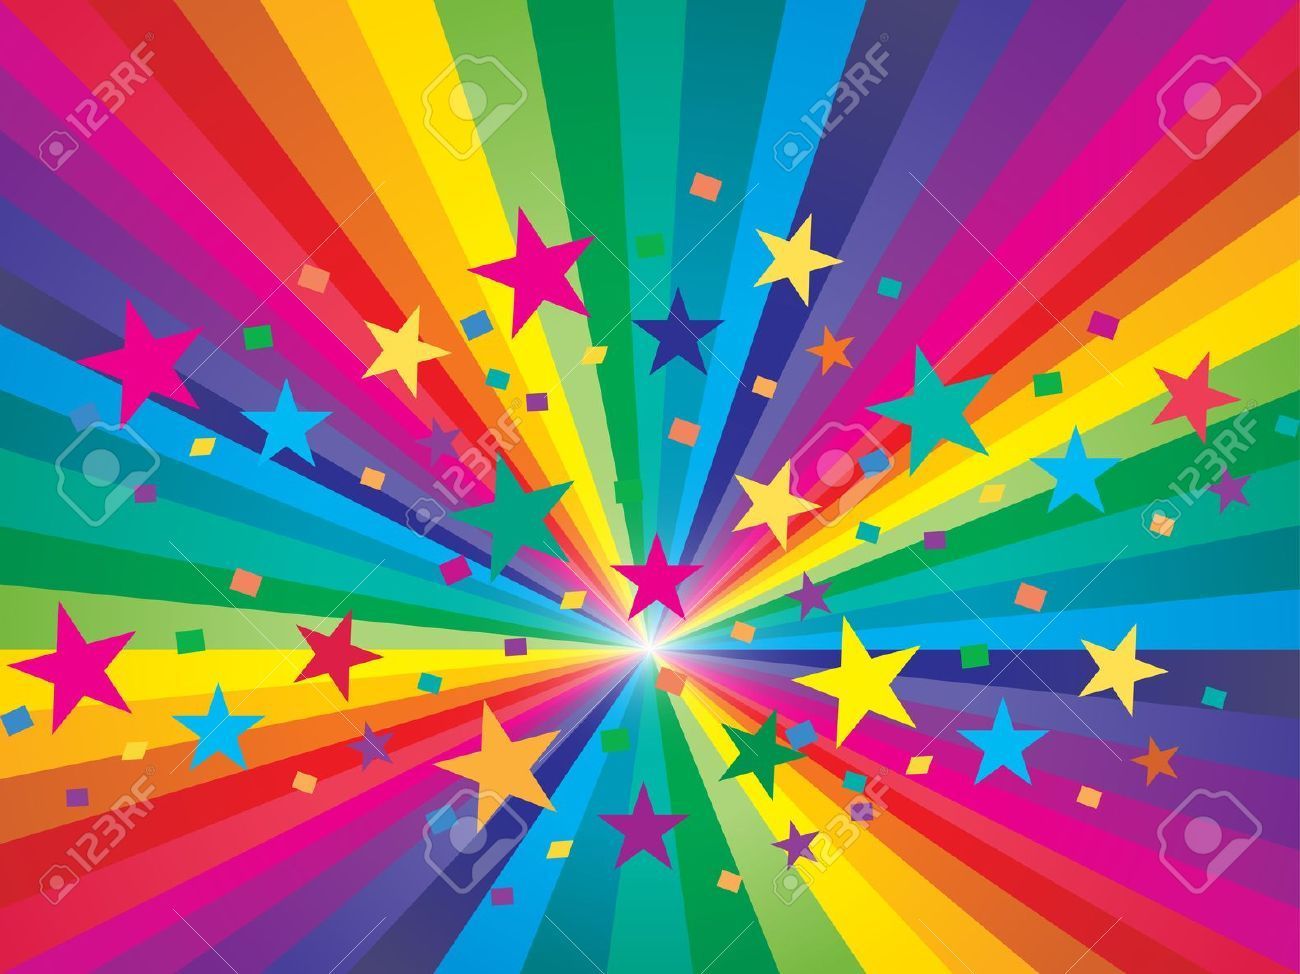 Awesome rainbow abstract background image. Rainbow background, Rainbow wallpaper, Rainbow abstract